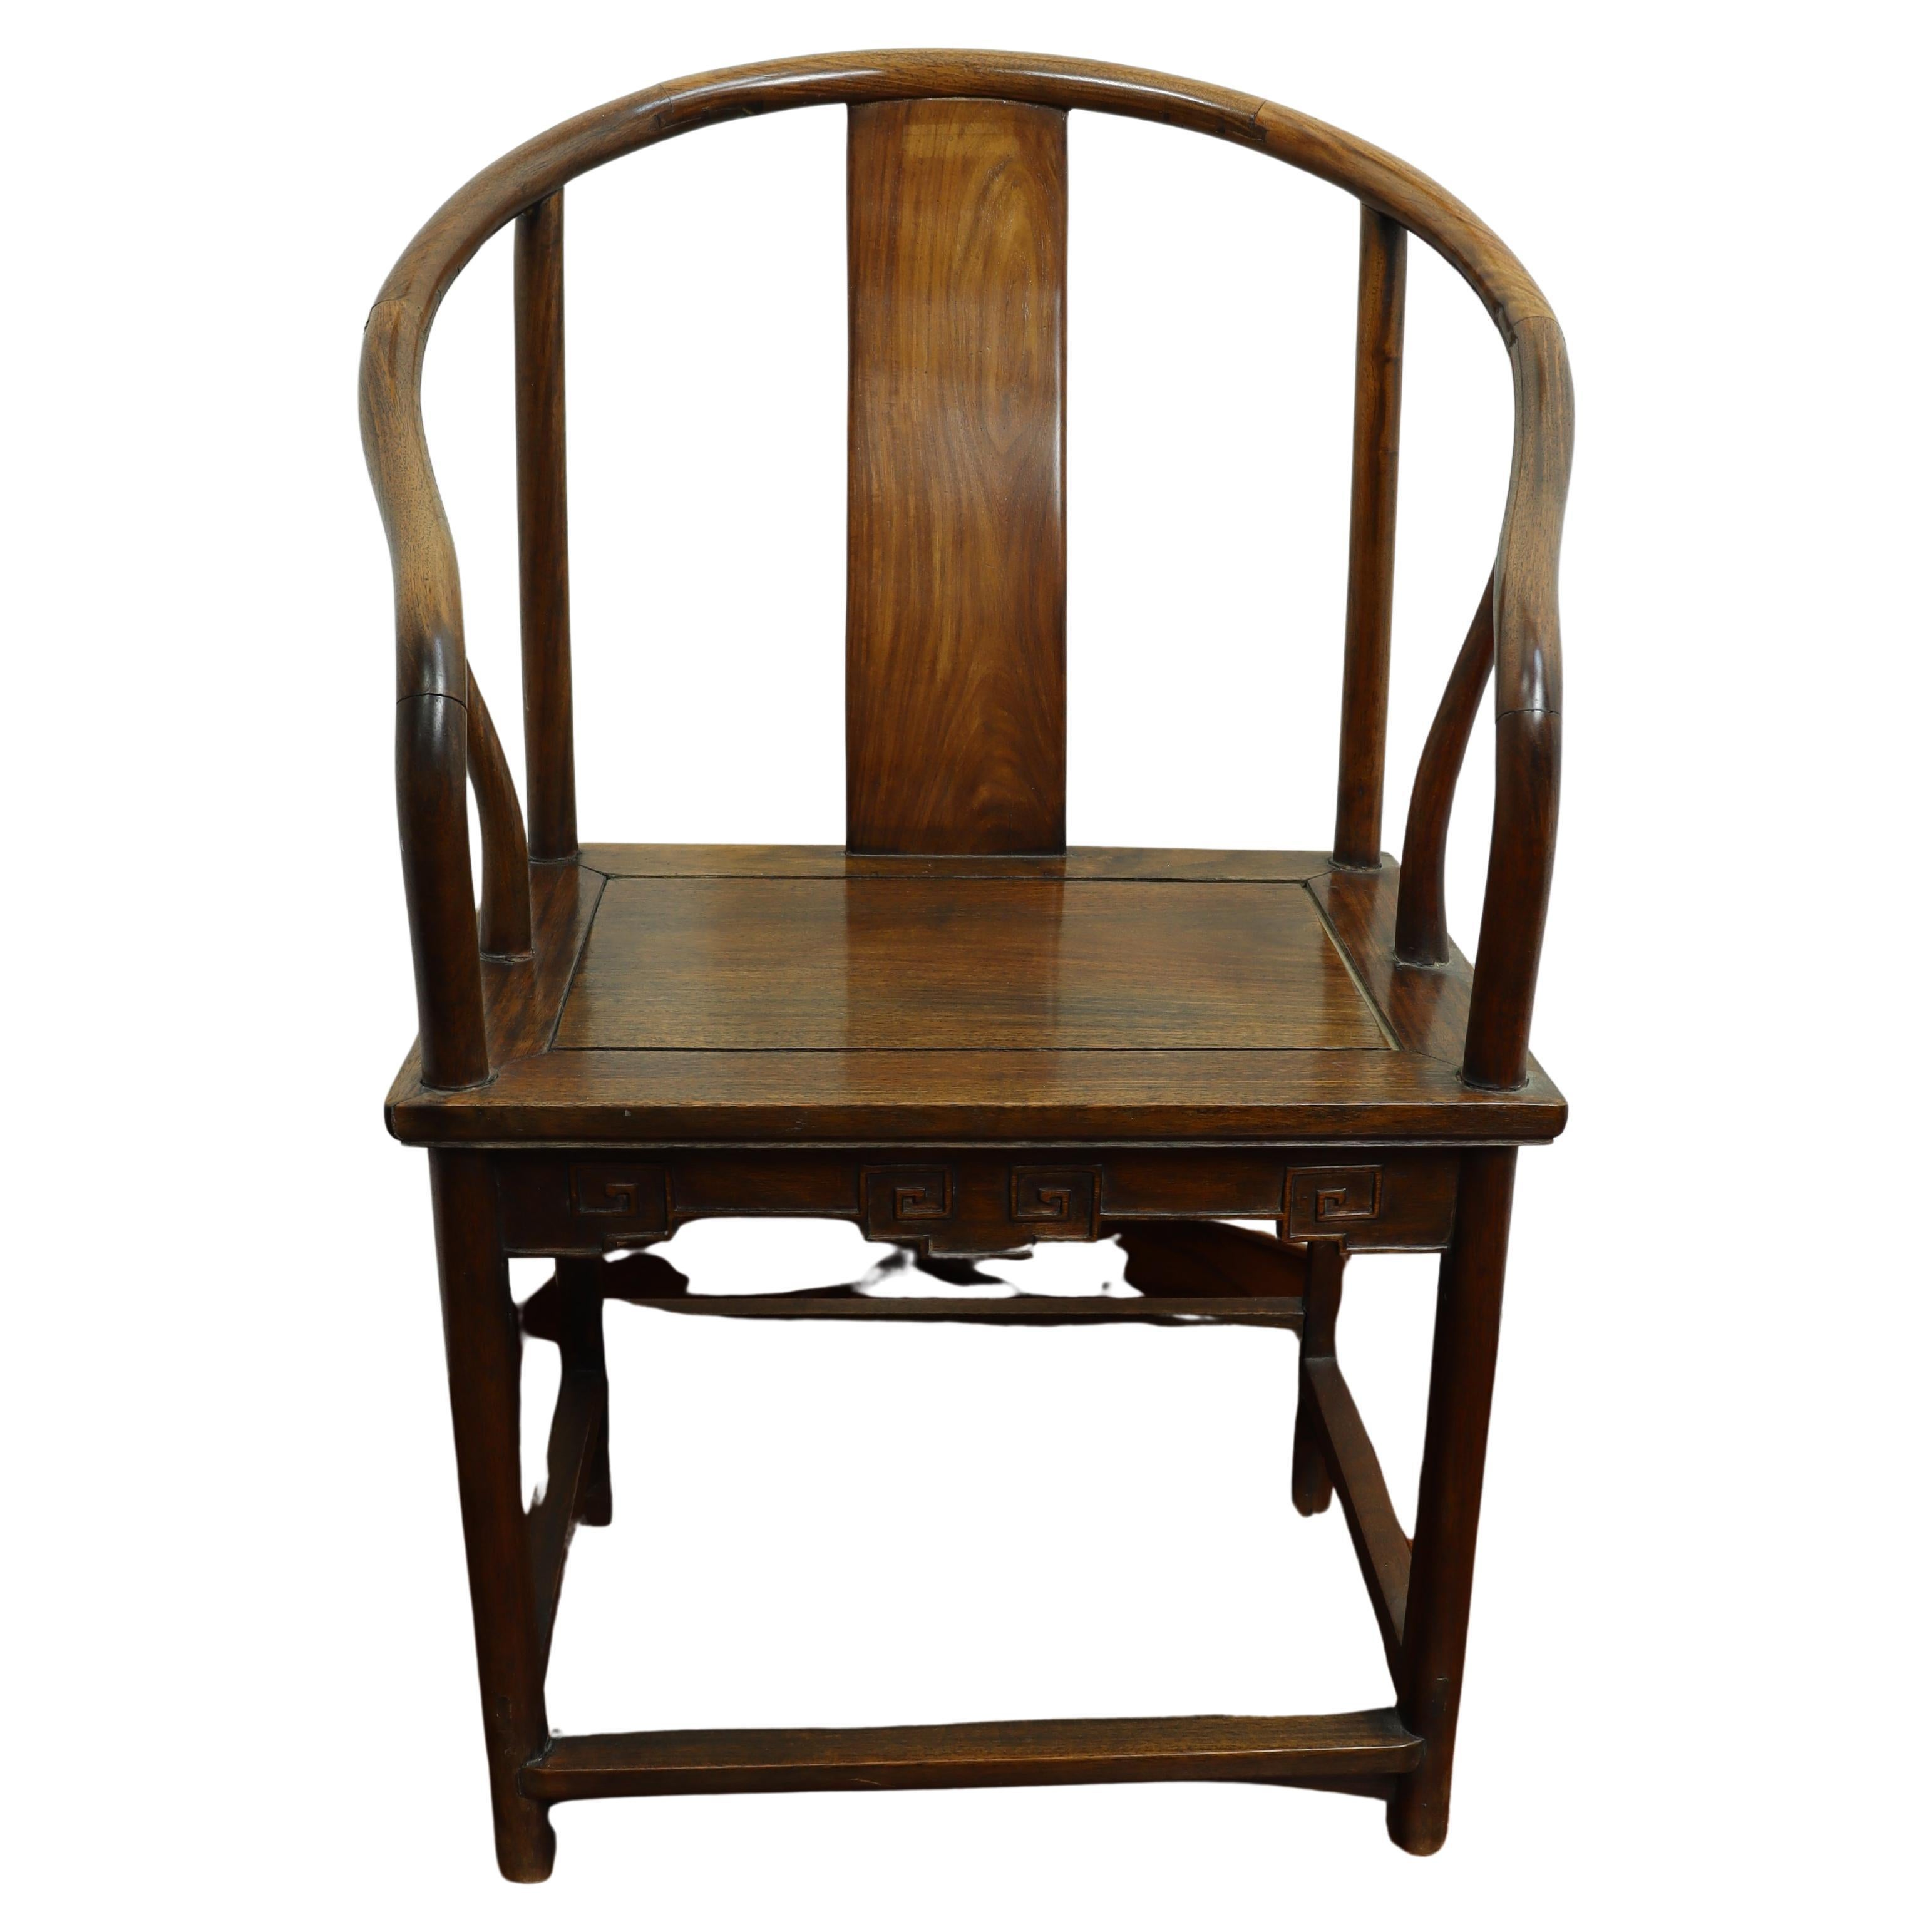 Antique Carved Chinese Hardwood Horseshoe Chair Late 19th Century